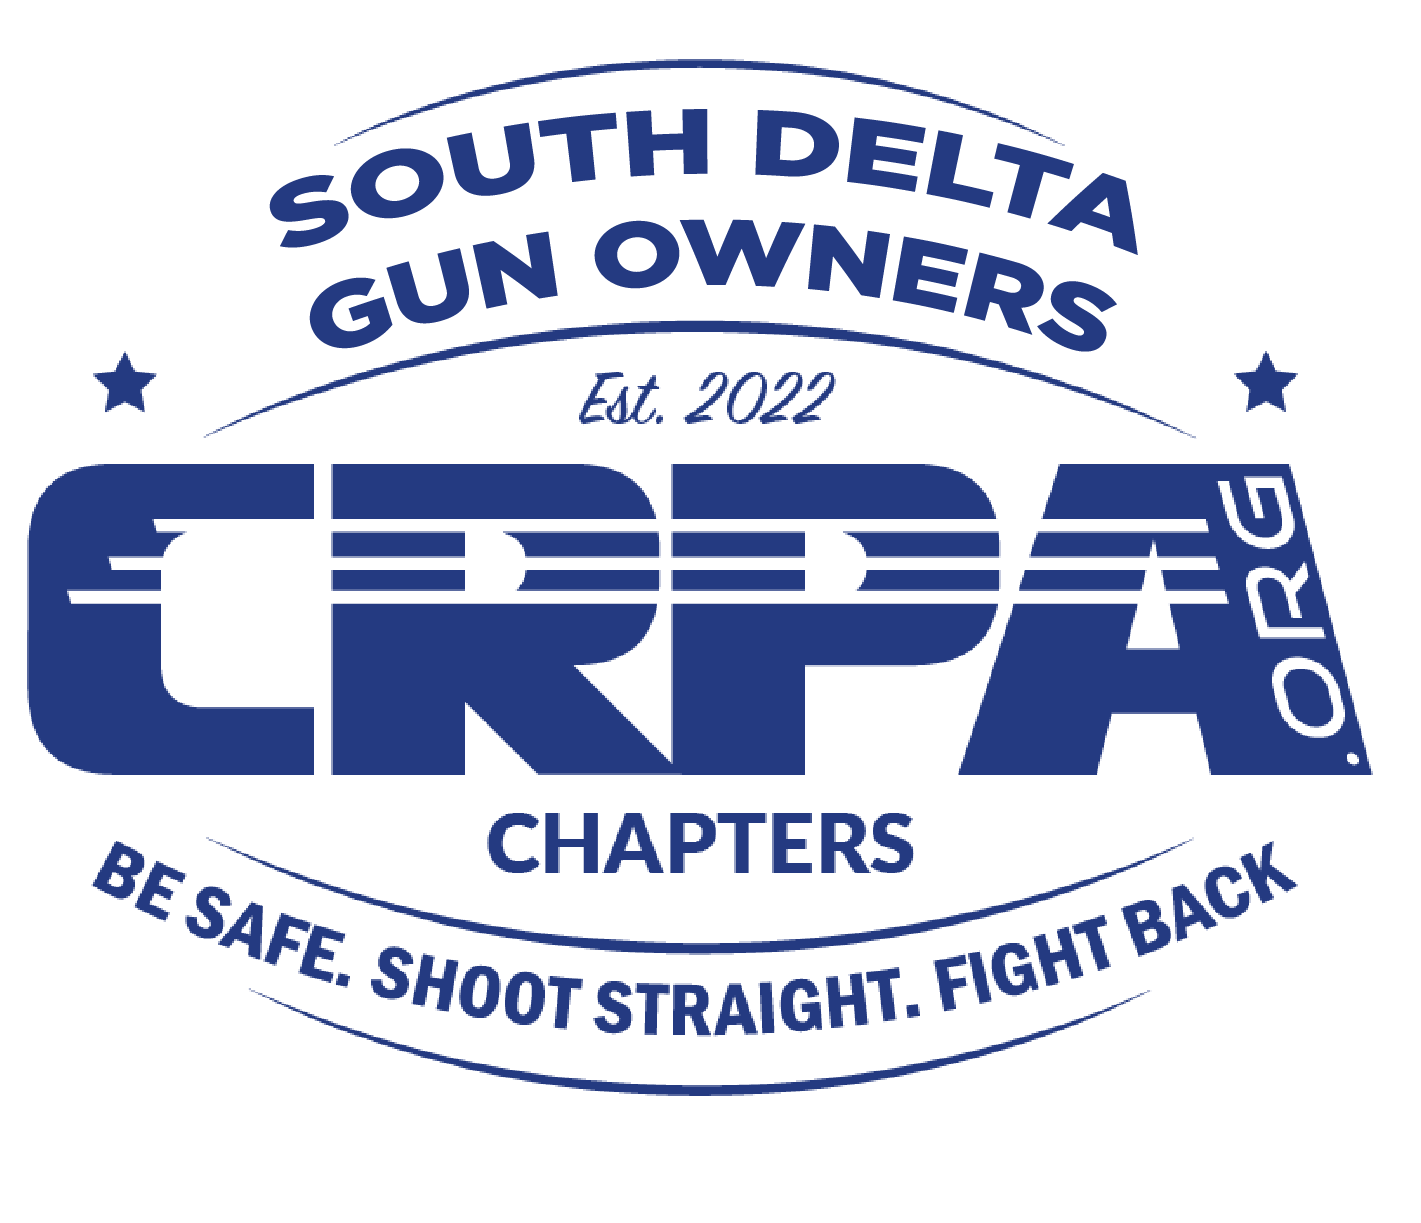 South Delta Gun Owners: A CRPA Chapter